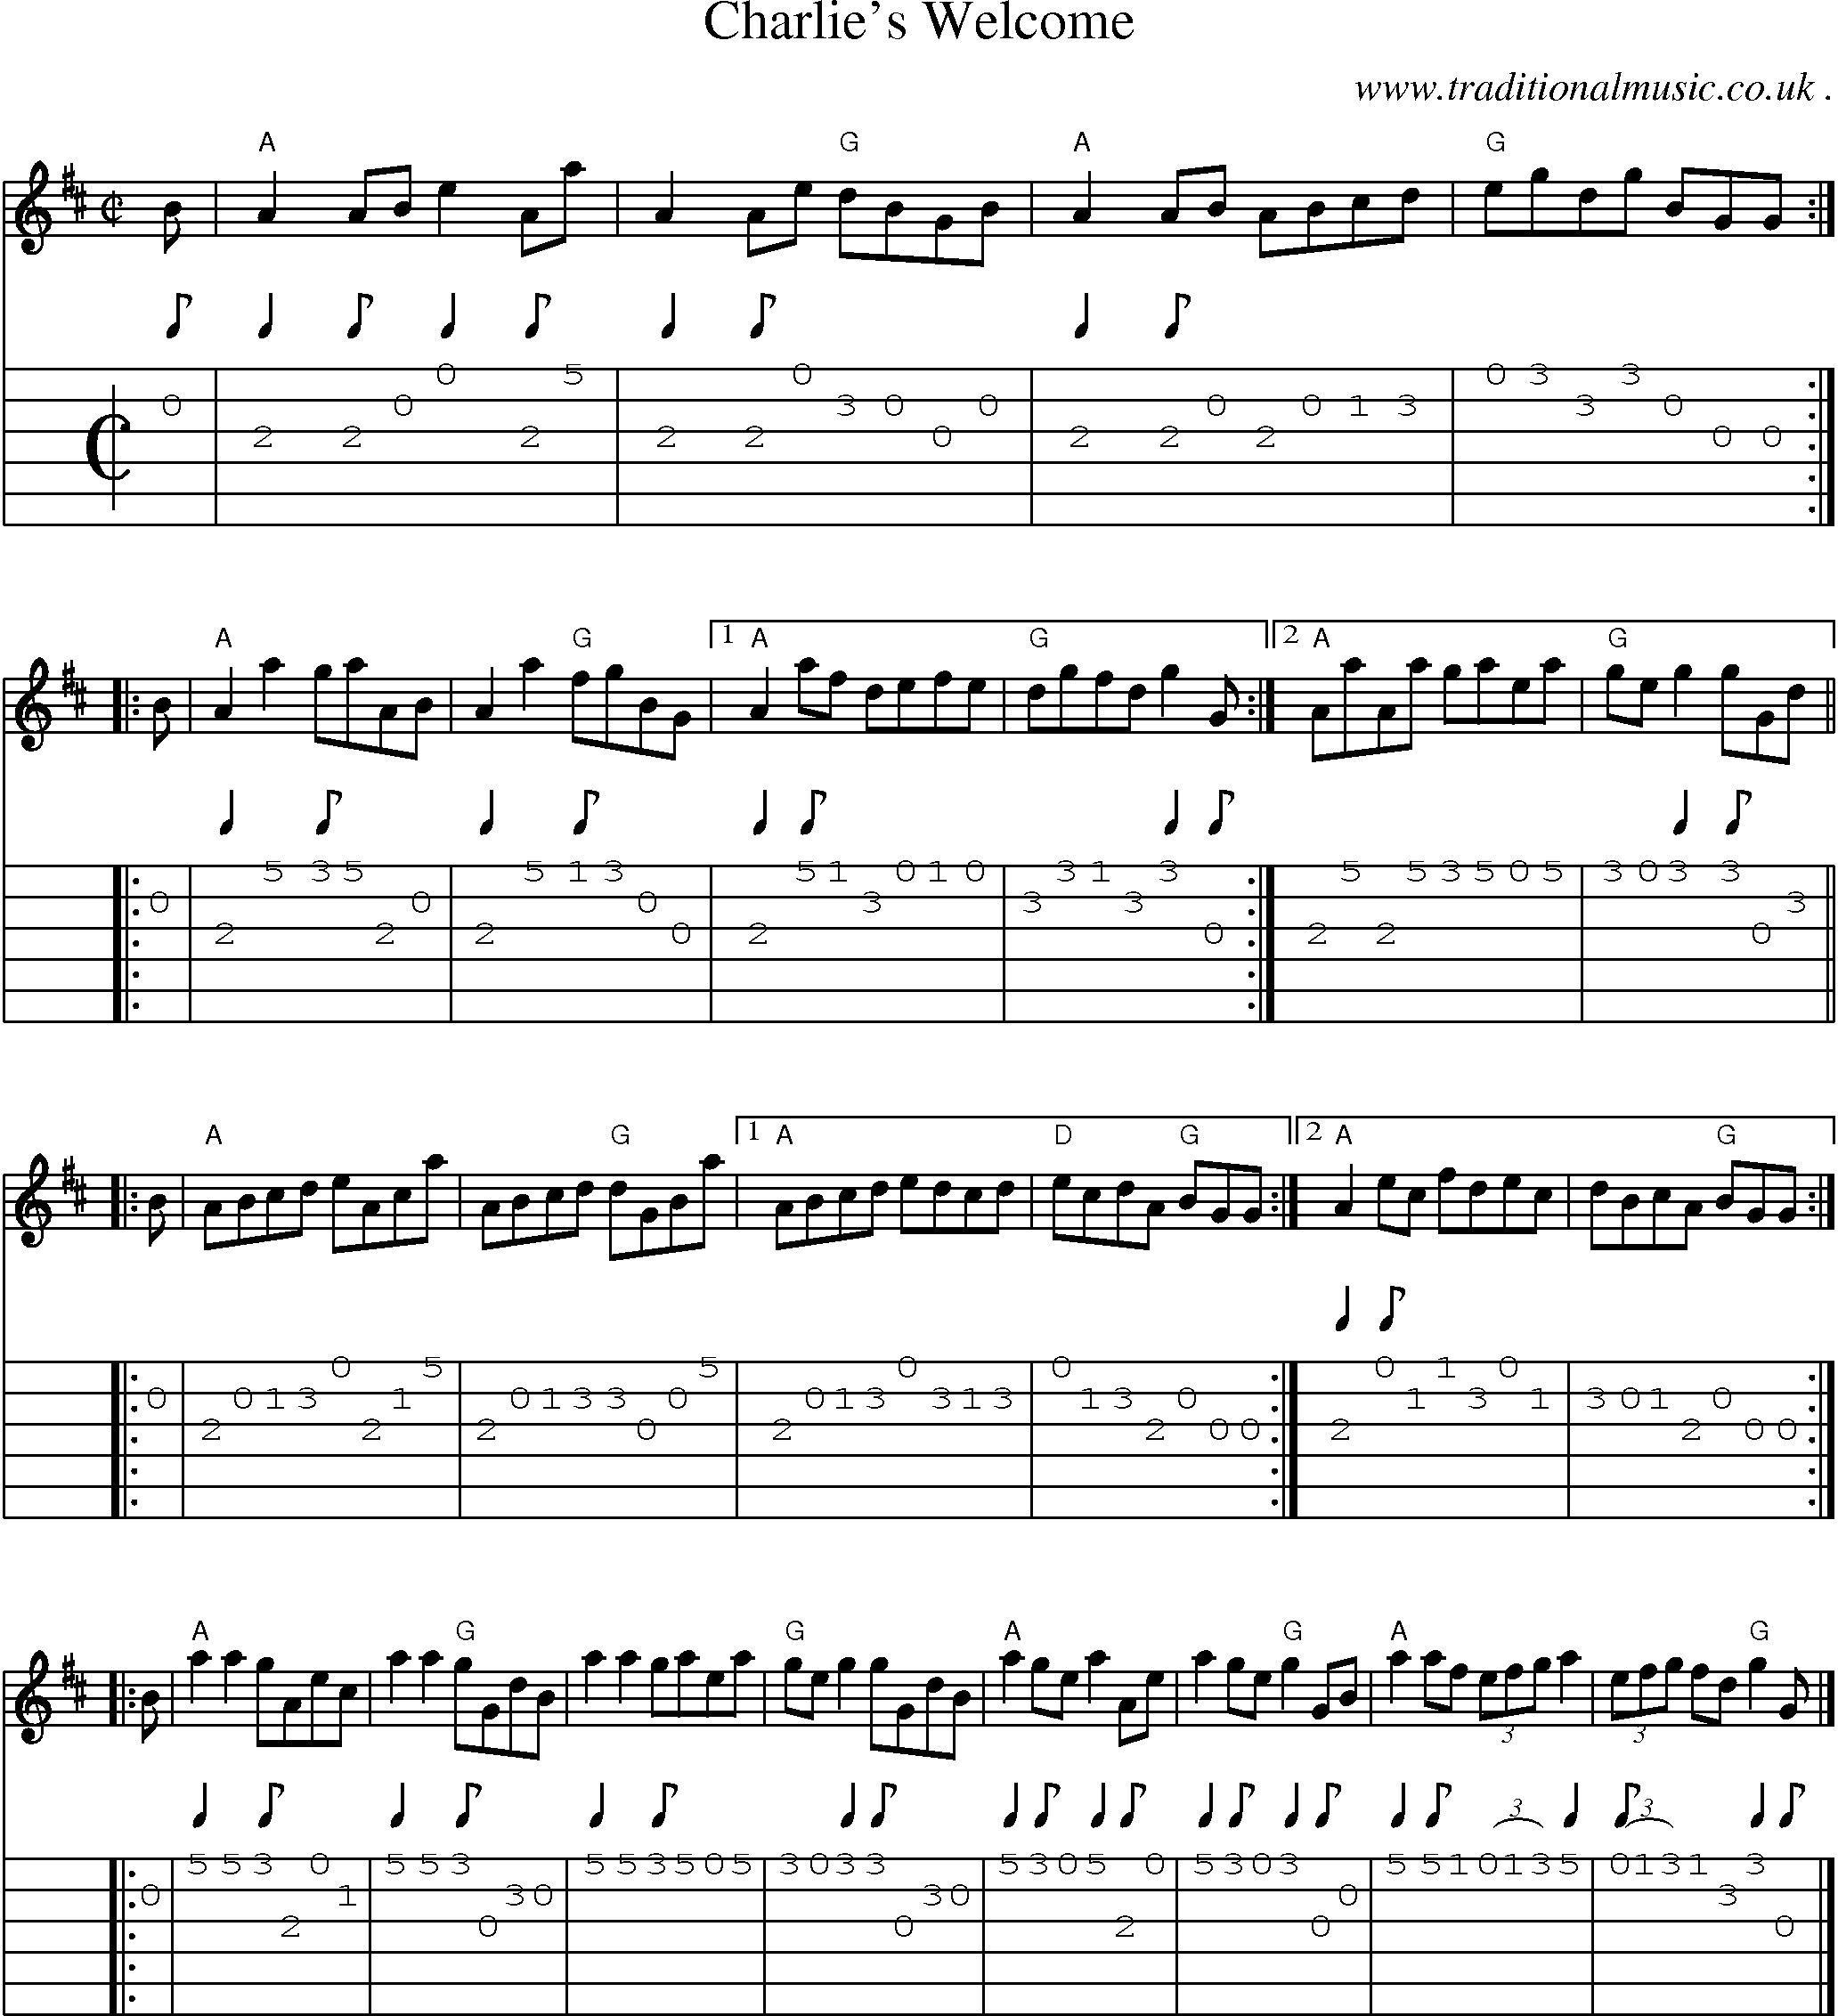 Sheet-music  score, Chords and Guitar Tabs for Charlies Welcome